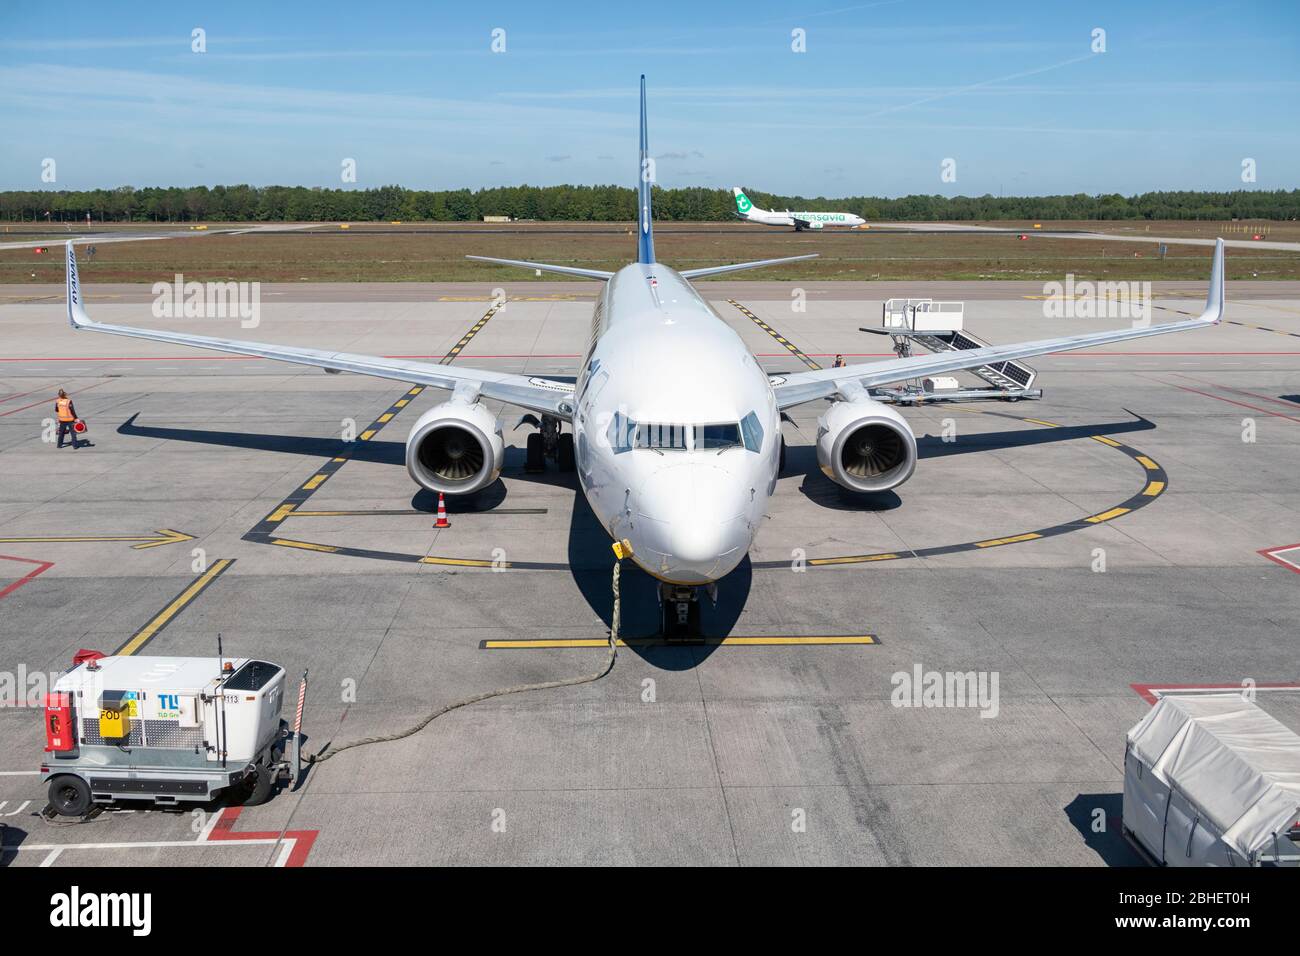 Airplane is prepared for departure at Eindhoven airport Stock Photo